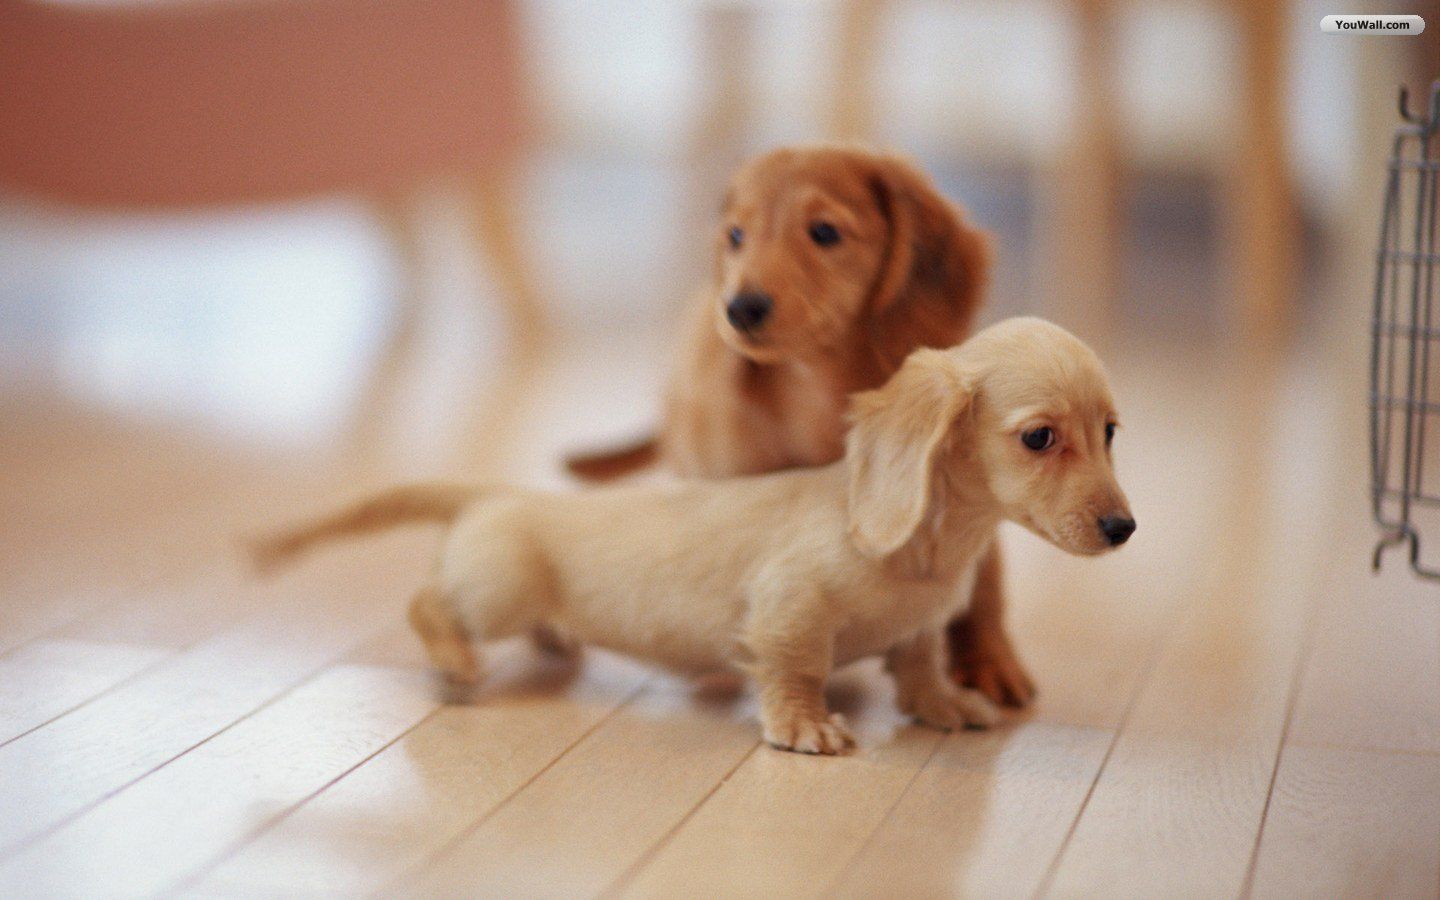 YouWall - Lovely Puppies Wallpaper - wallpaper,wallpapers,free ...